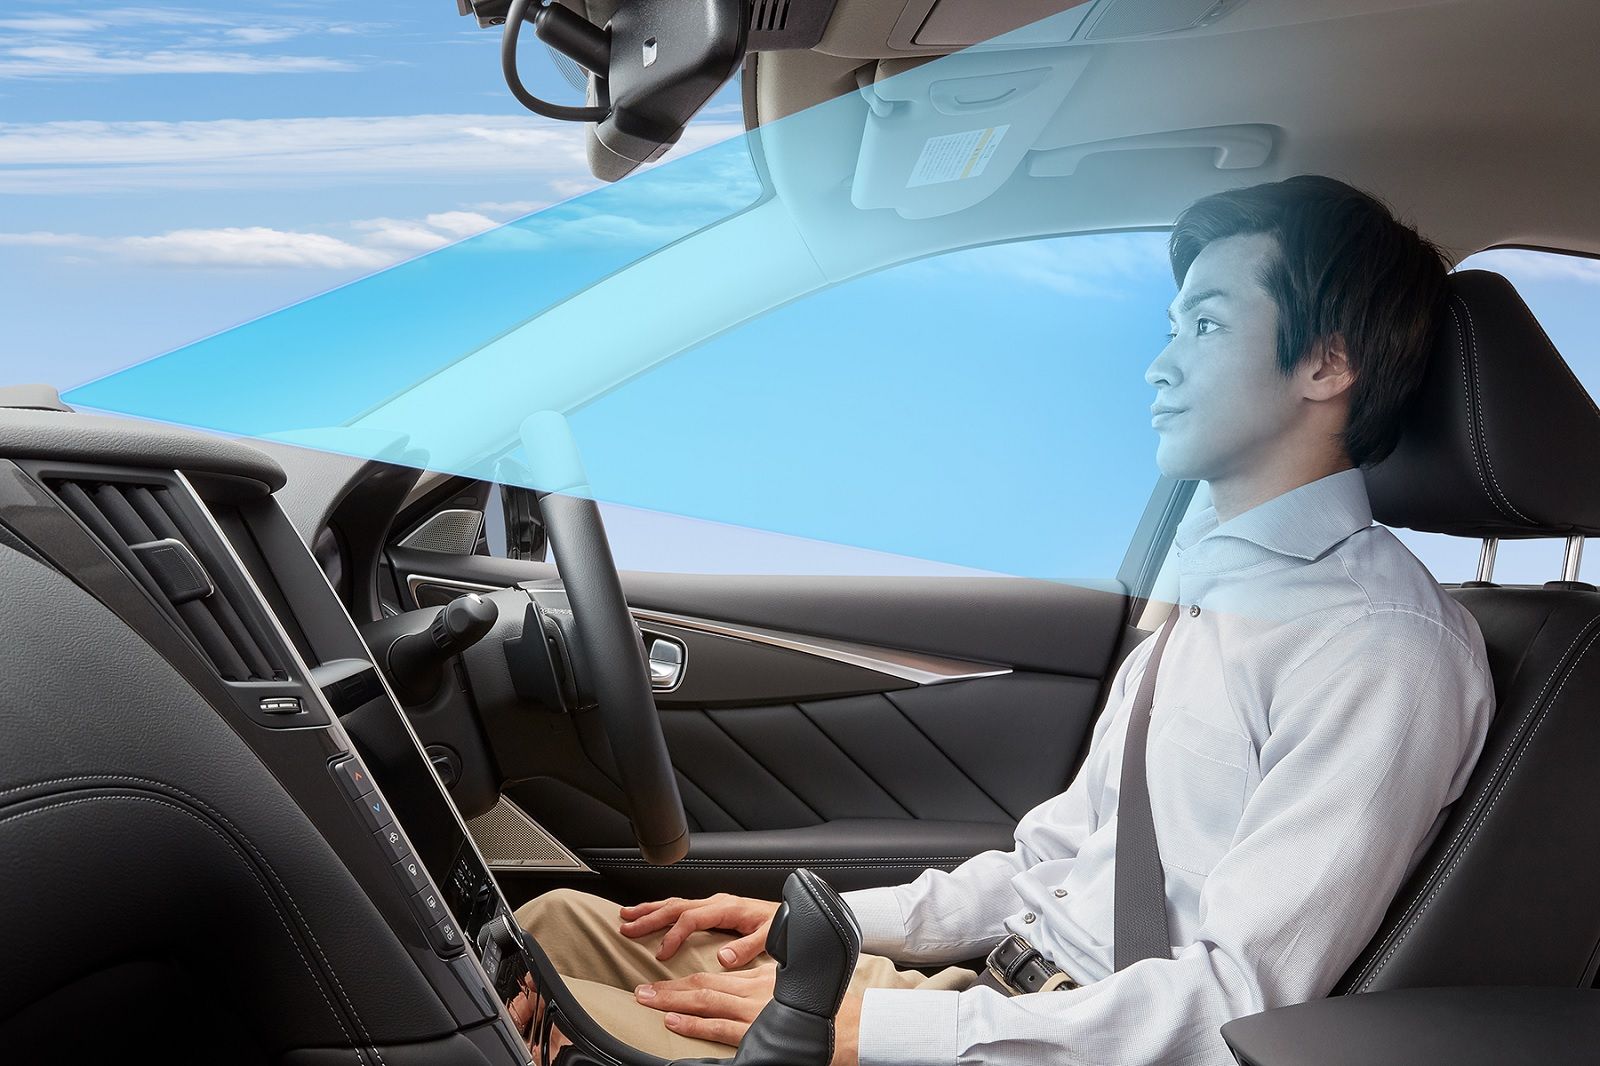 Nissan launches hands-free driver assistance image 1